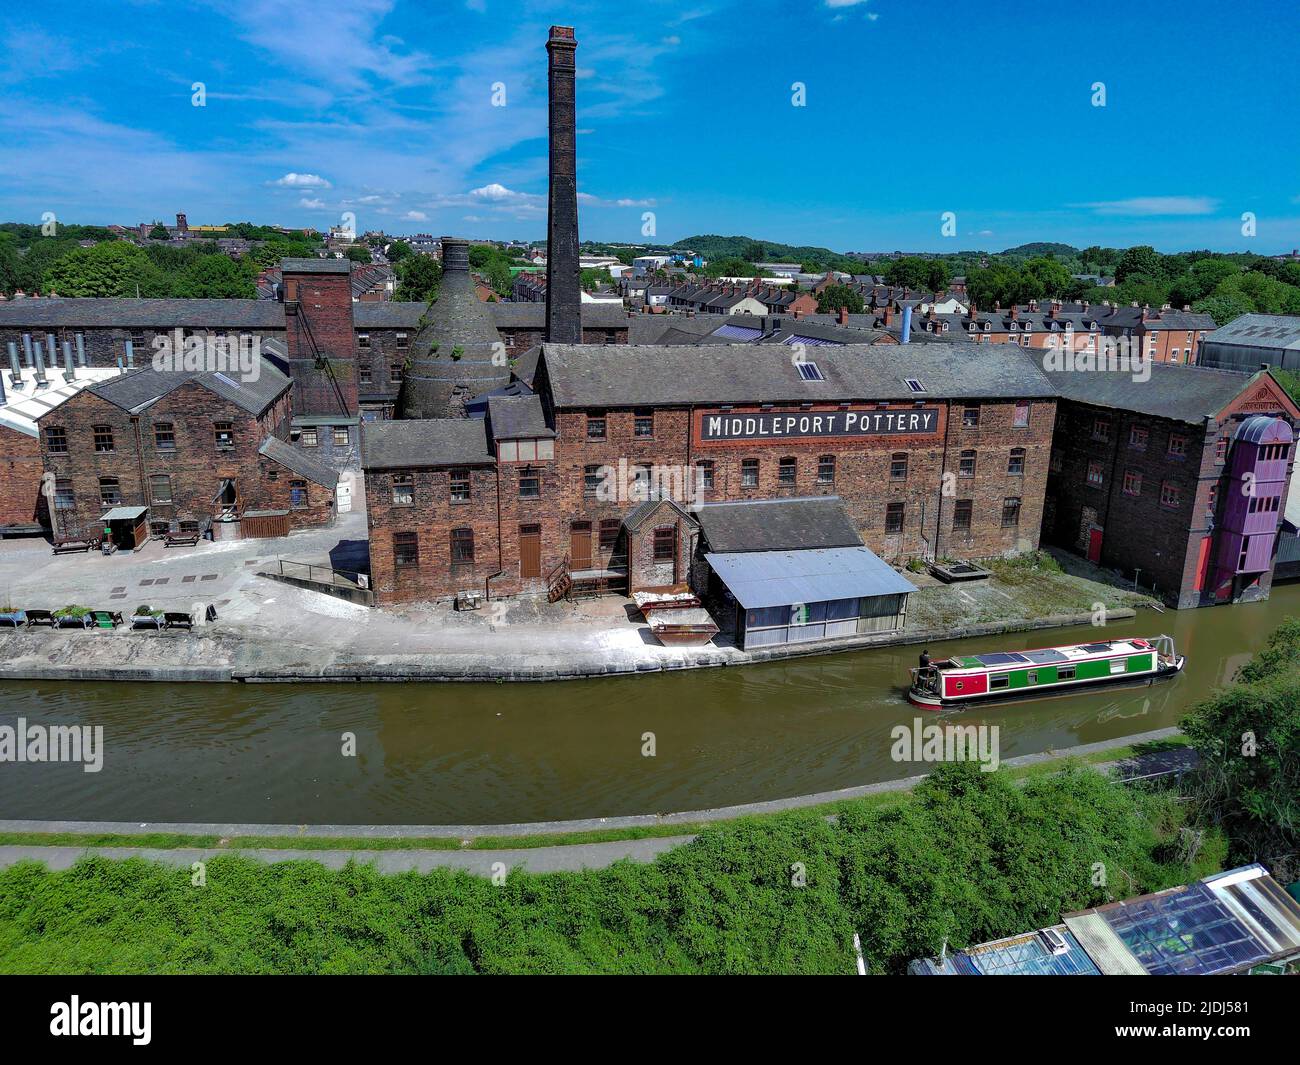 The Caldon Canal and Middleport Pottery  with a sunken boat Aerial Drone Stock Photo